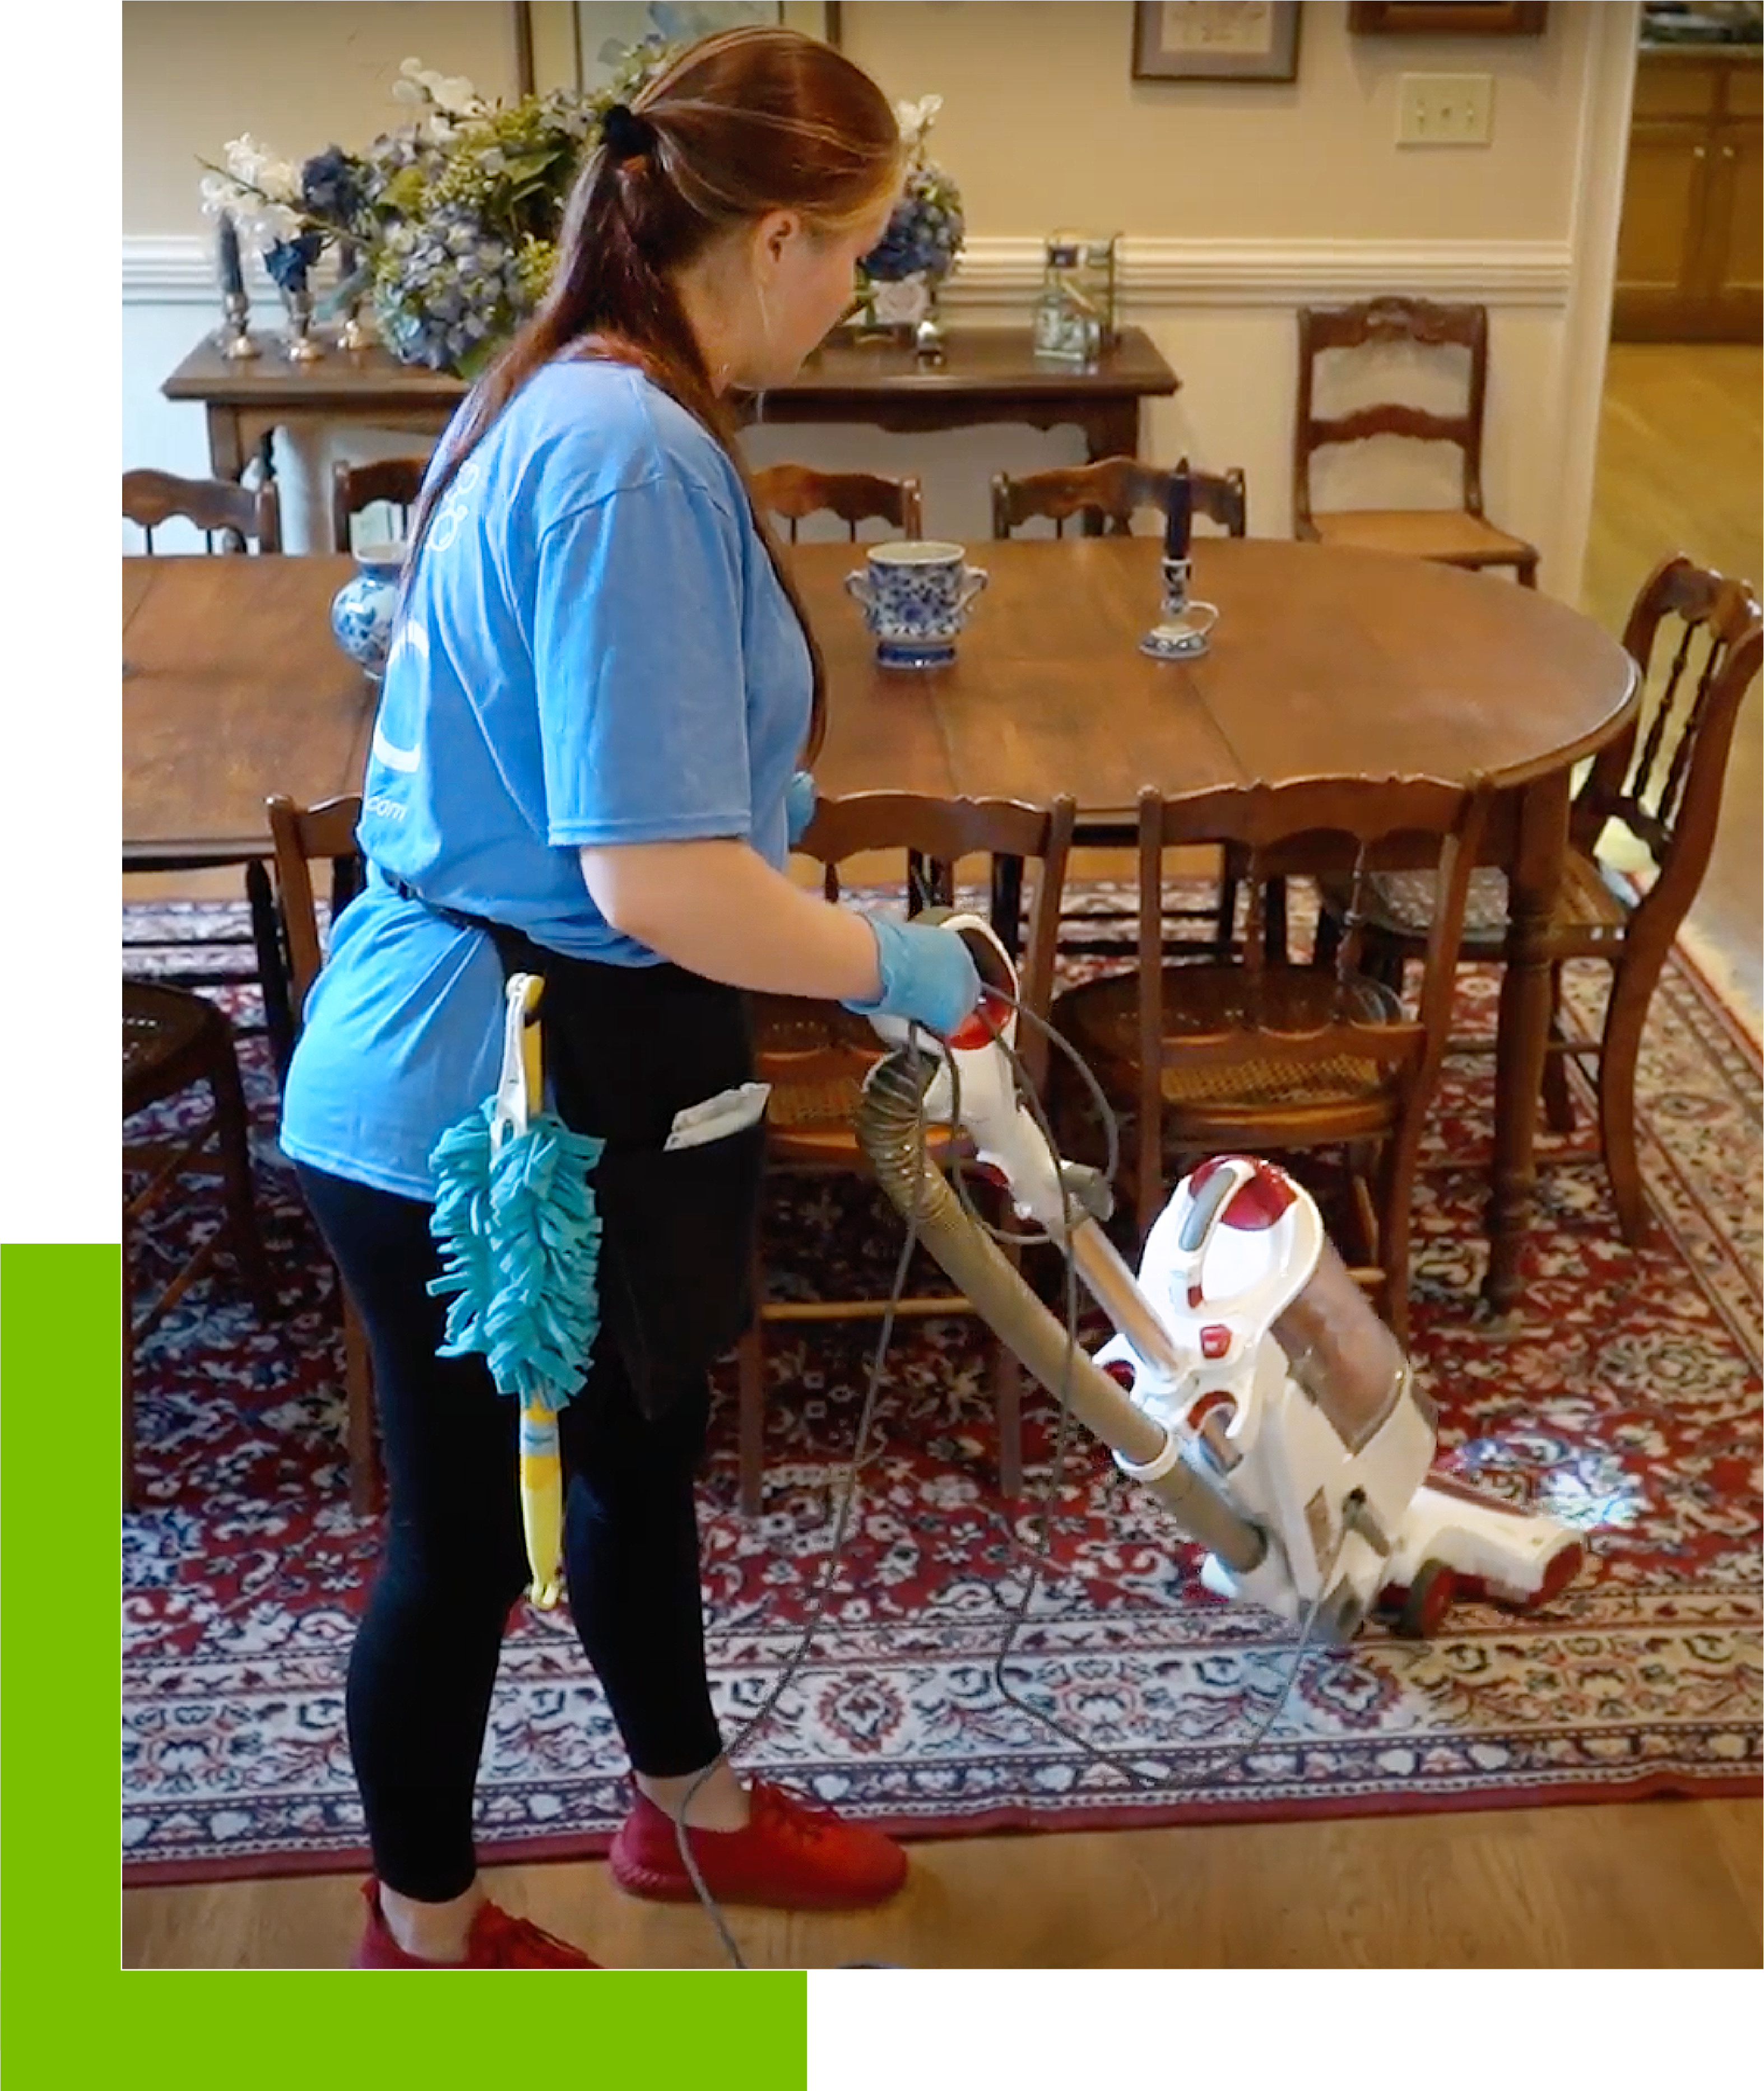 Looking for house cleaning services near me in Stockbridge, GA?